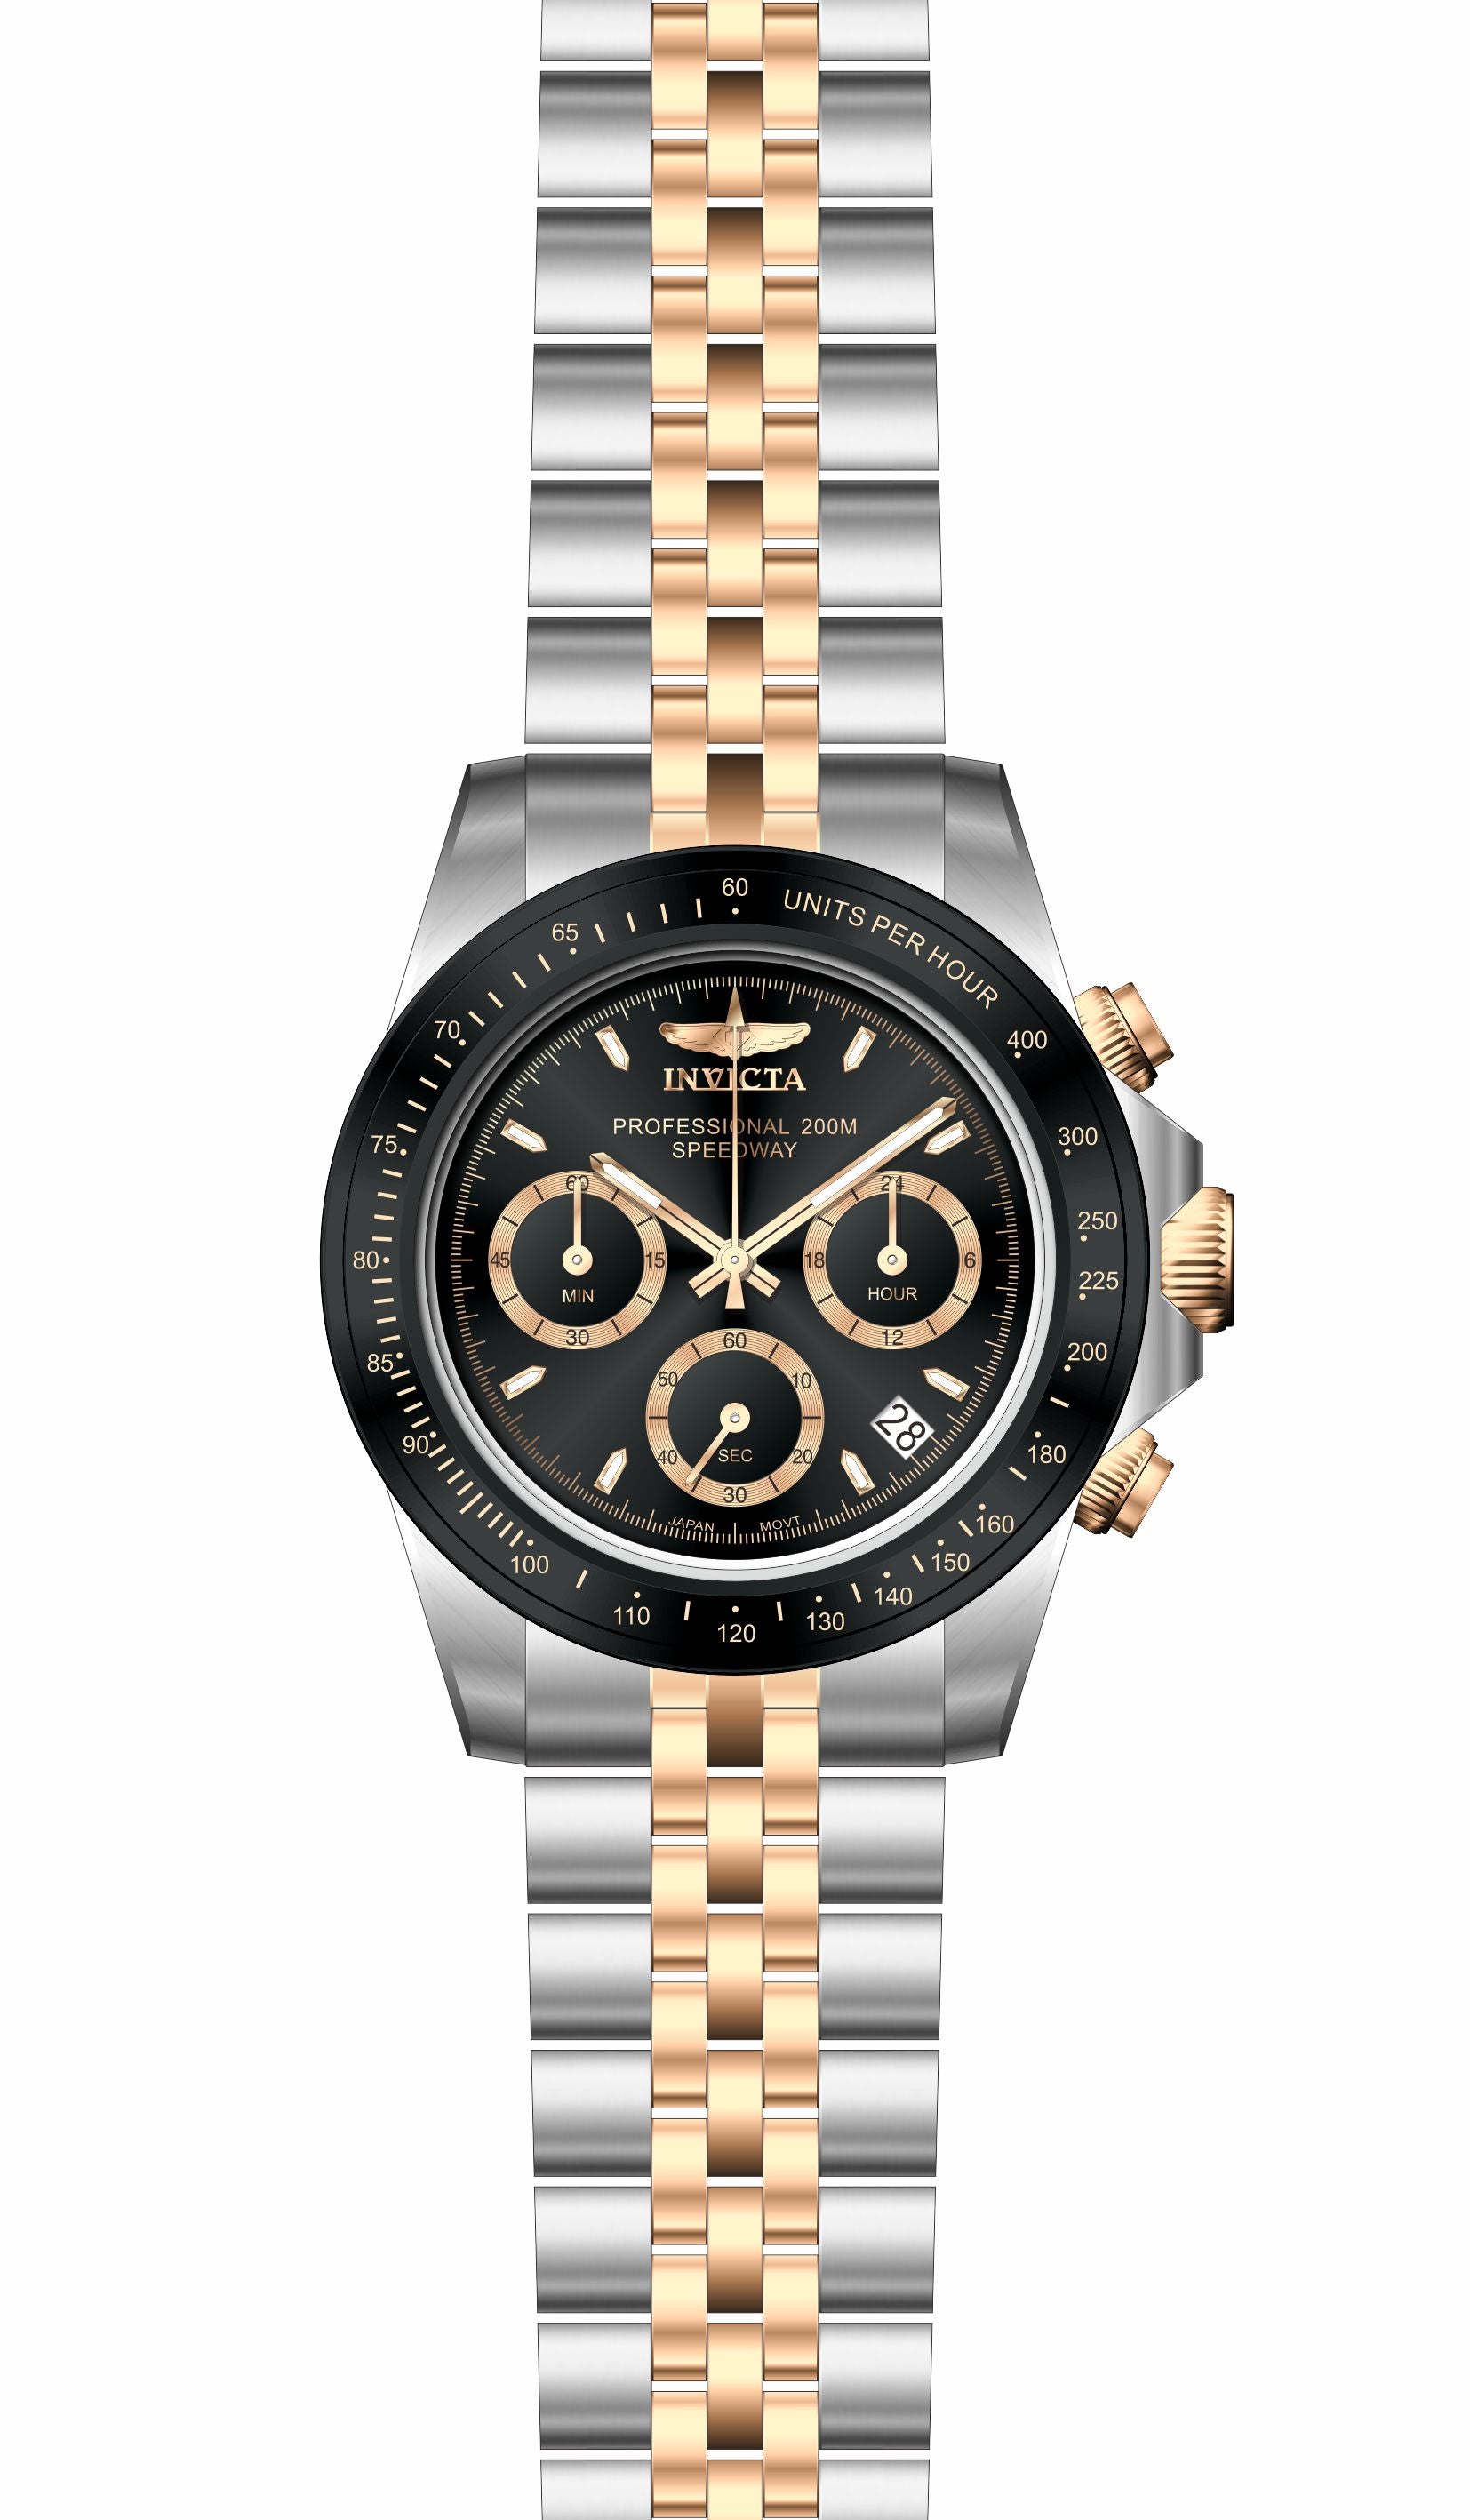 Band for Invicta Speedway Men 36740